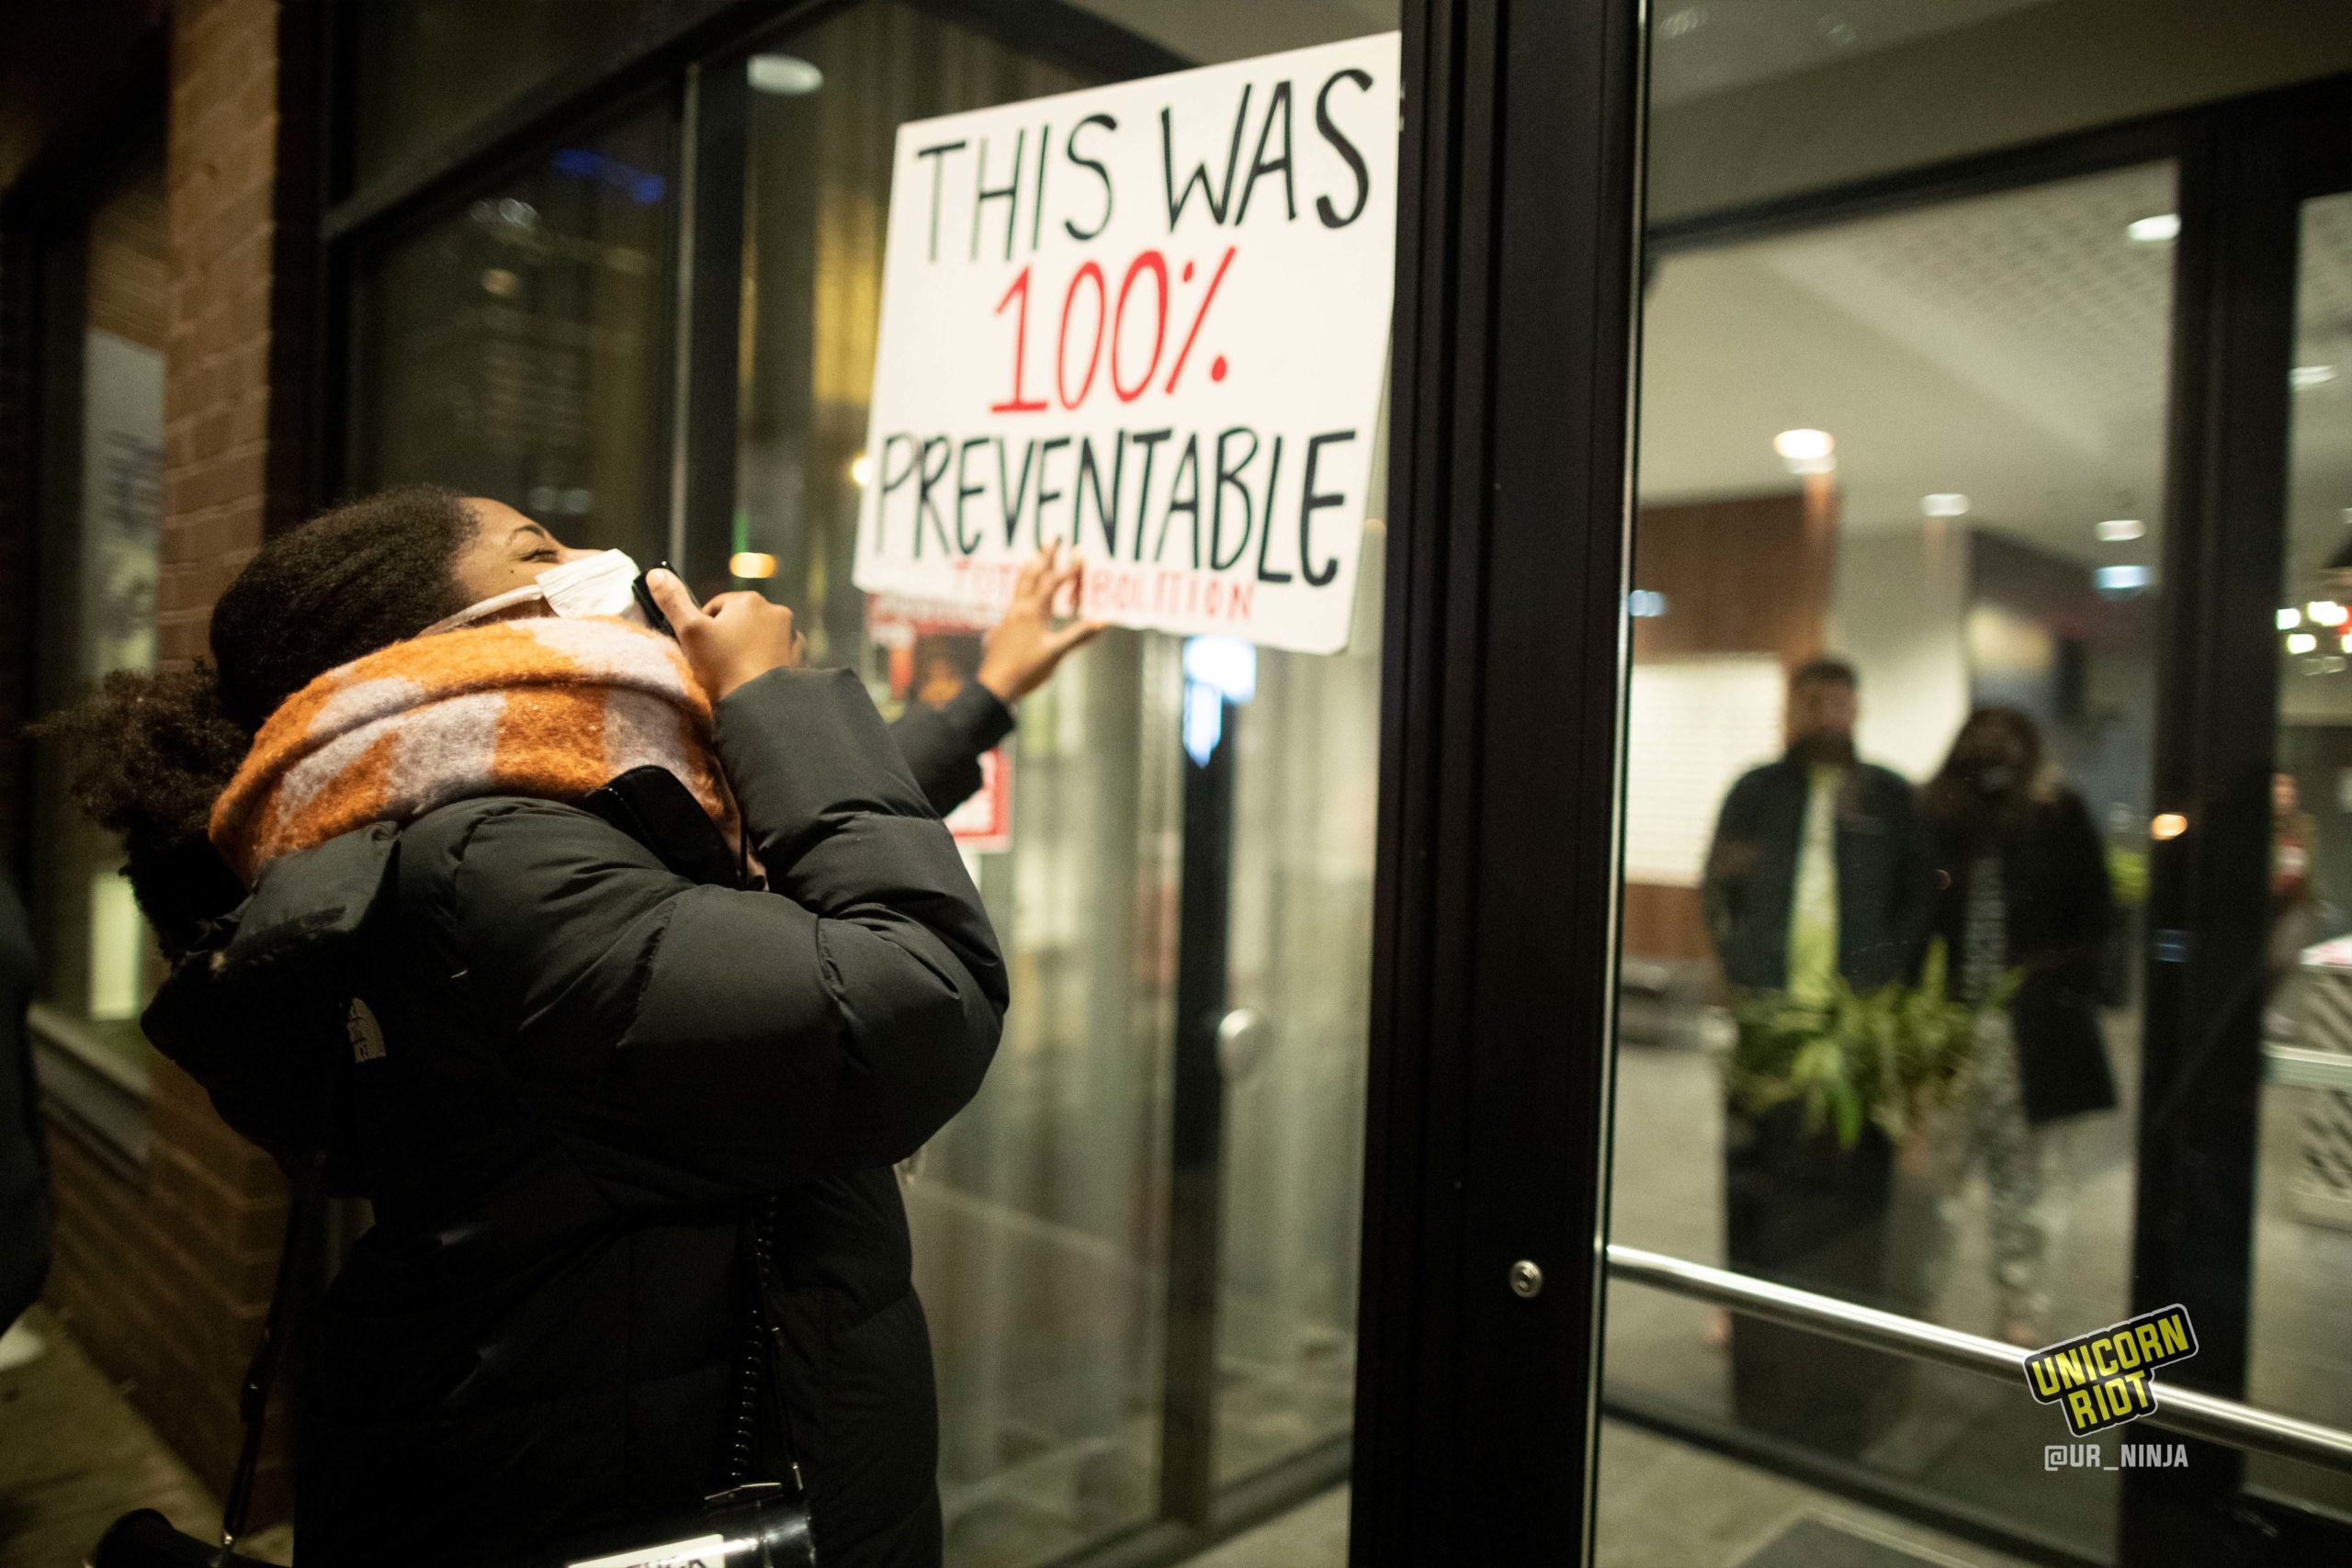 February 8, 2022, Minneapolis, Minnesota, USA: Screaming into a megaphone, a women shouts as she stands outside of the Bolero Flats Apartments. She holds a sign that reads "This was 100% Preventable - total abolition." On February 2, 22 year old Amir Locke was killed by Officer Mark Hanneman of the Minneapolis Police.